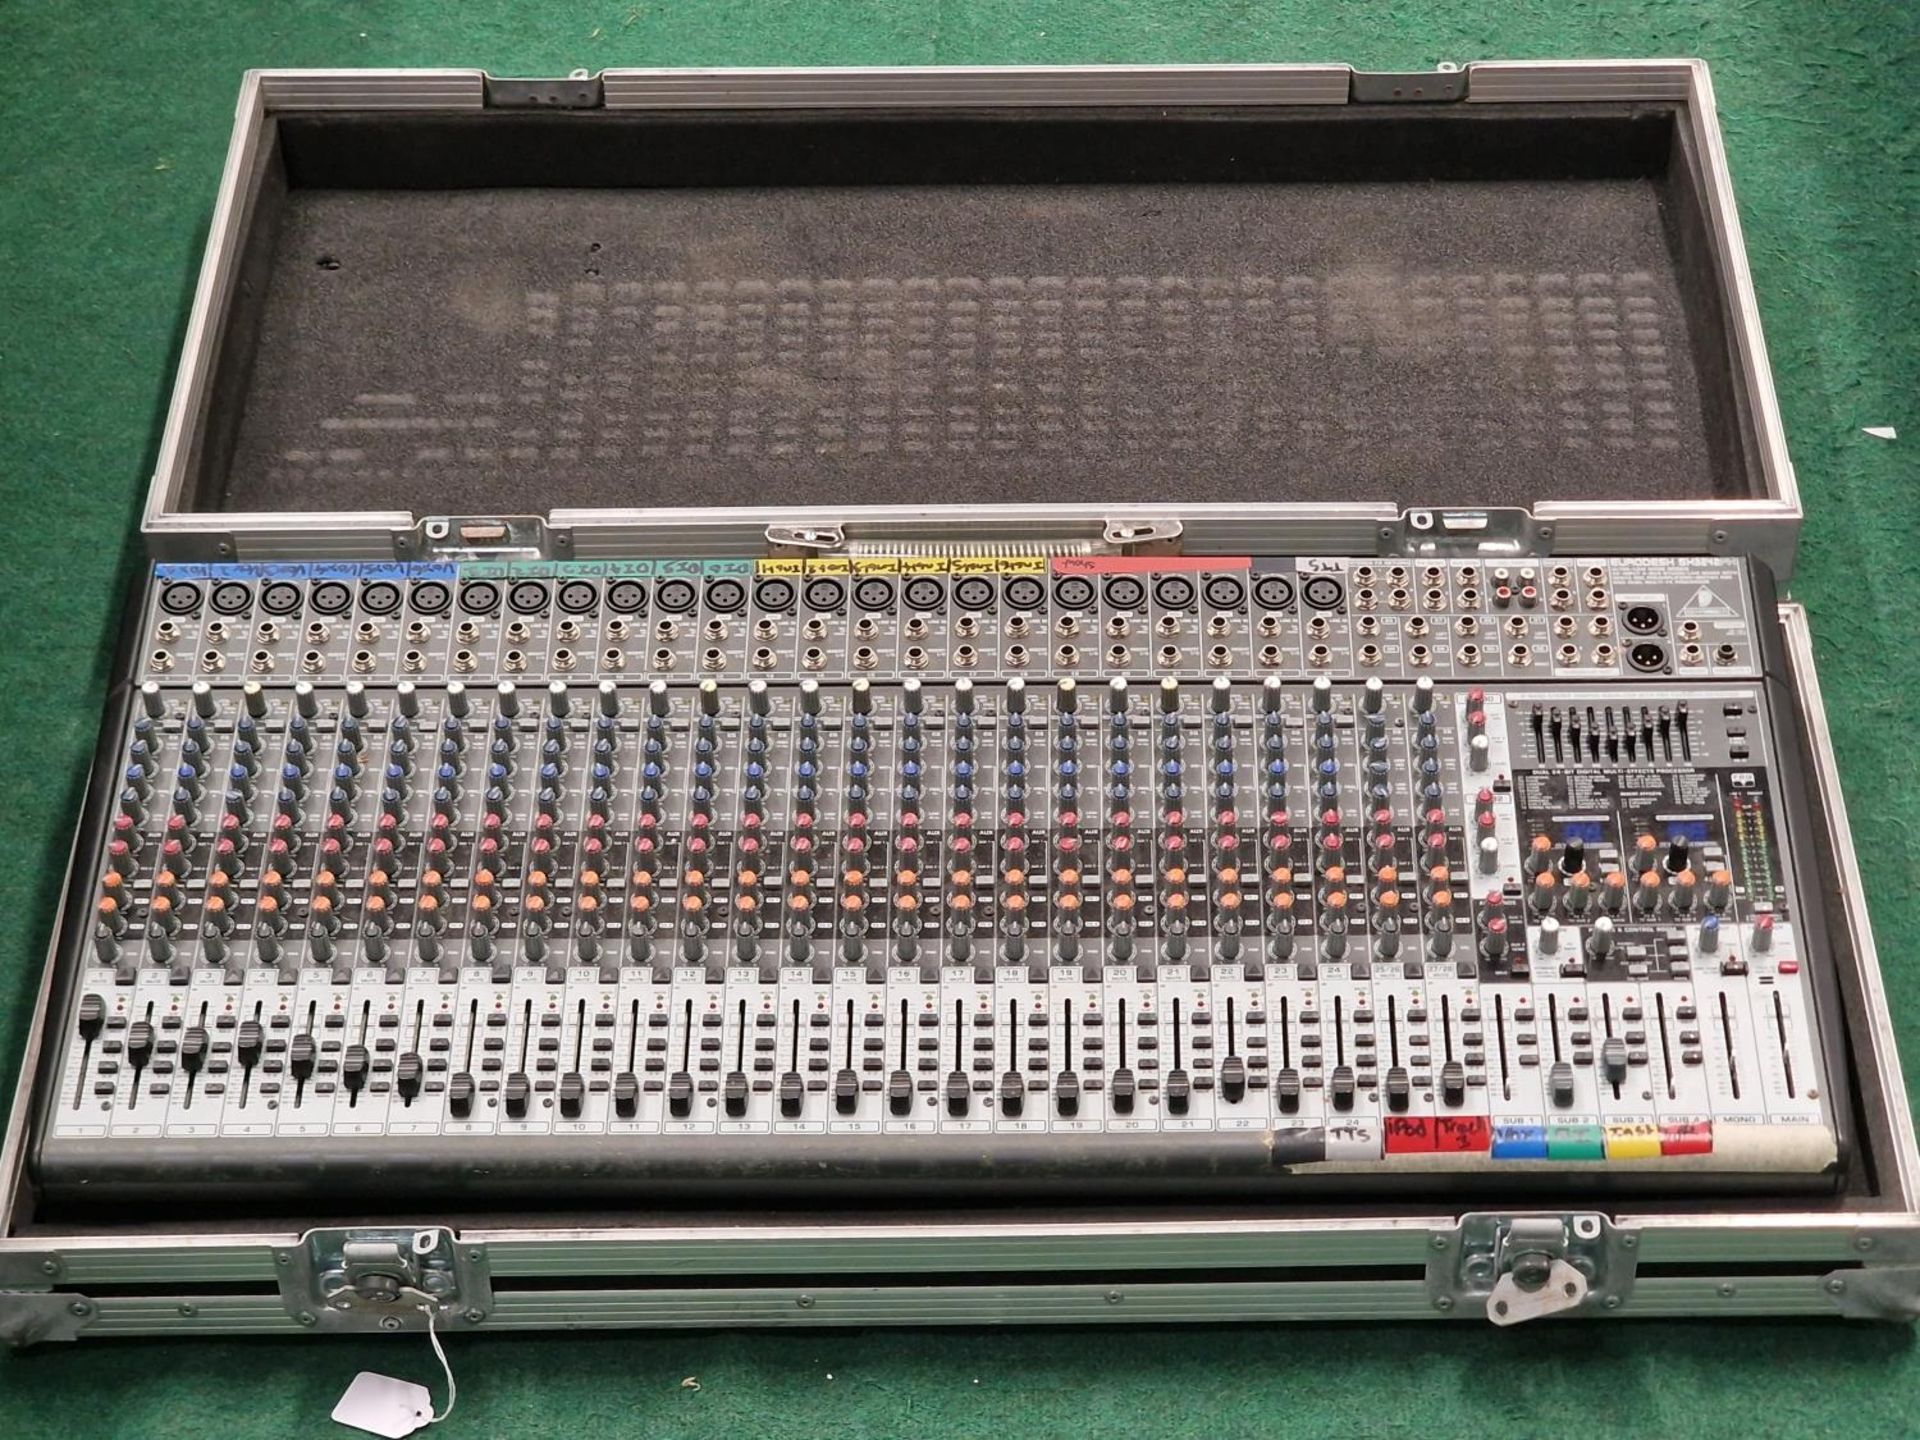 Behringer Eurodesk SX3242FX sound mixing desk. This unit comes in flight case and powers up when